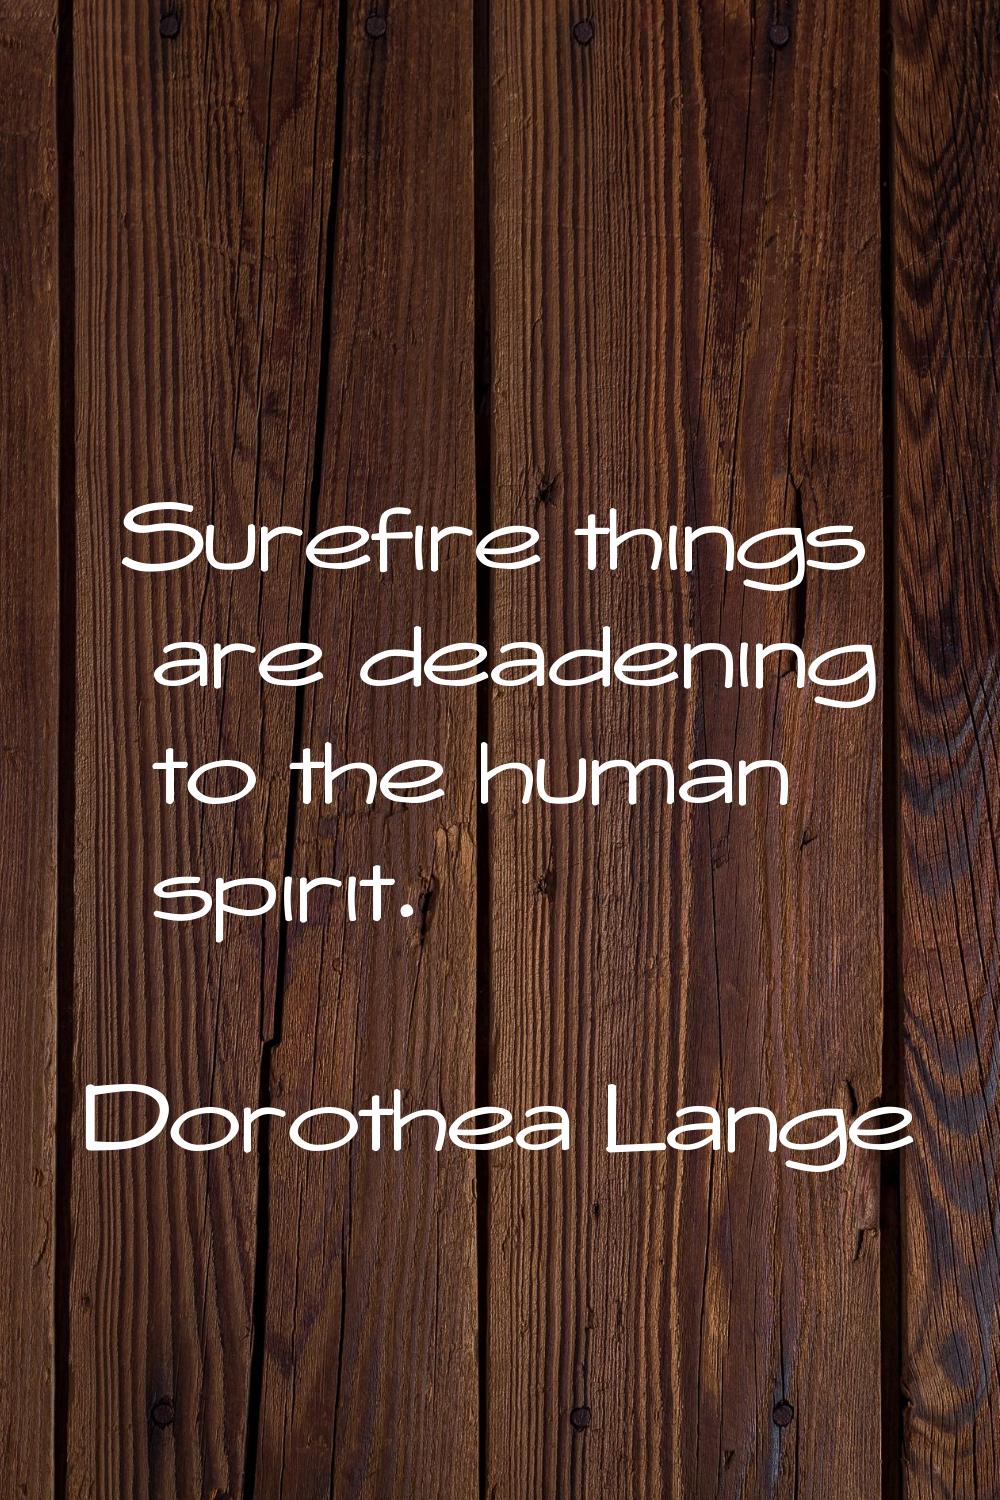 Surefire things are deadening to the human spirit.